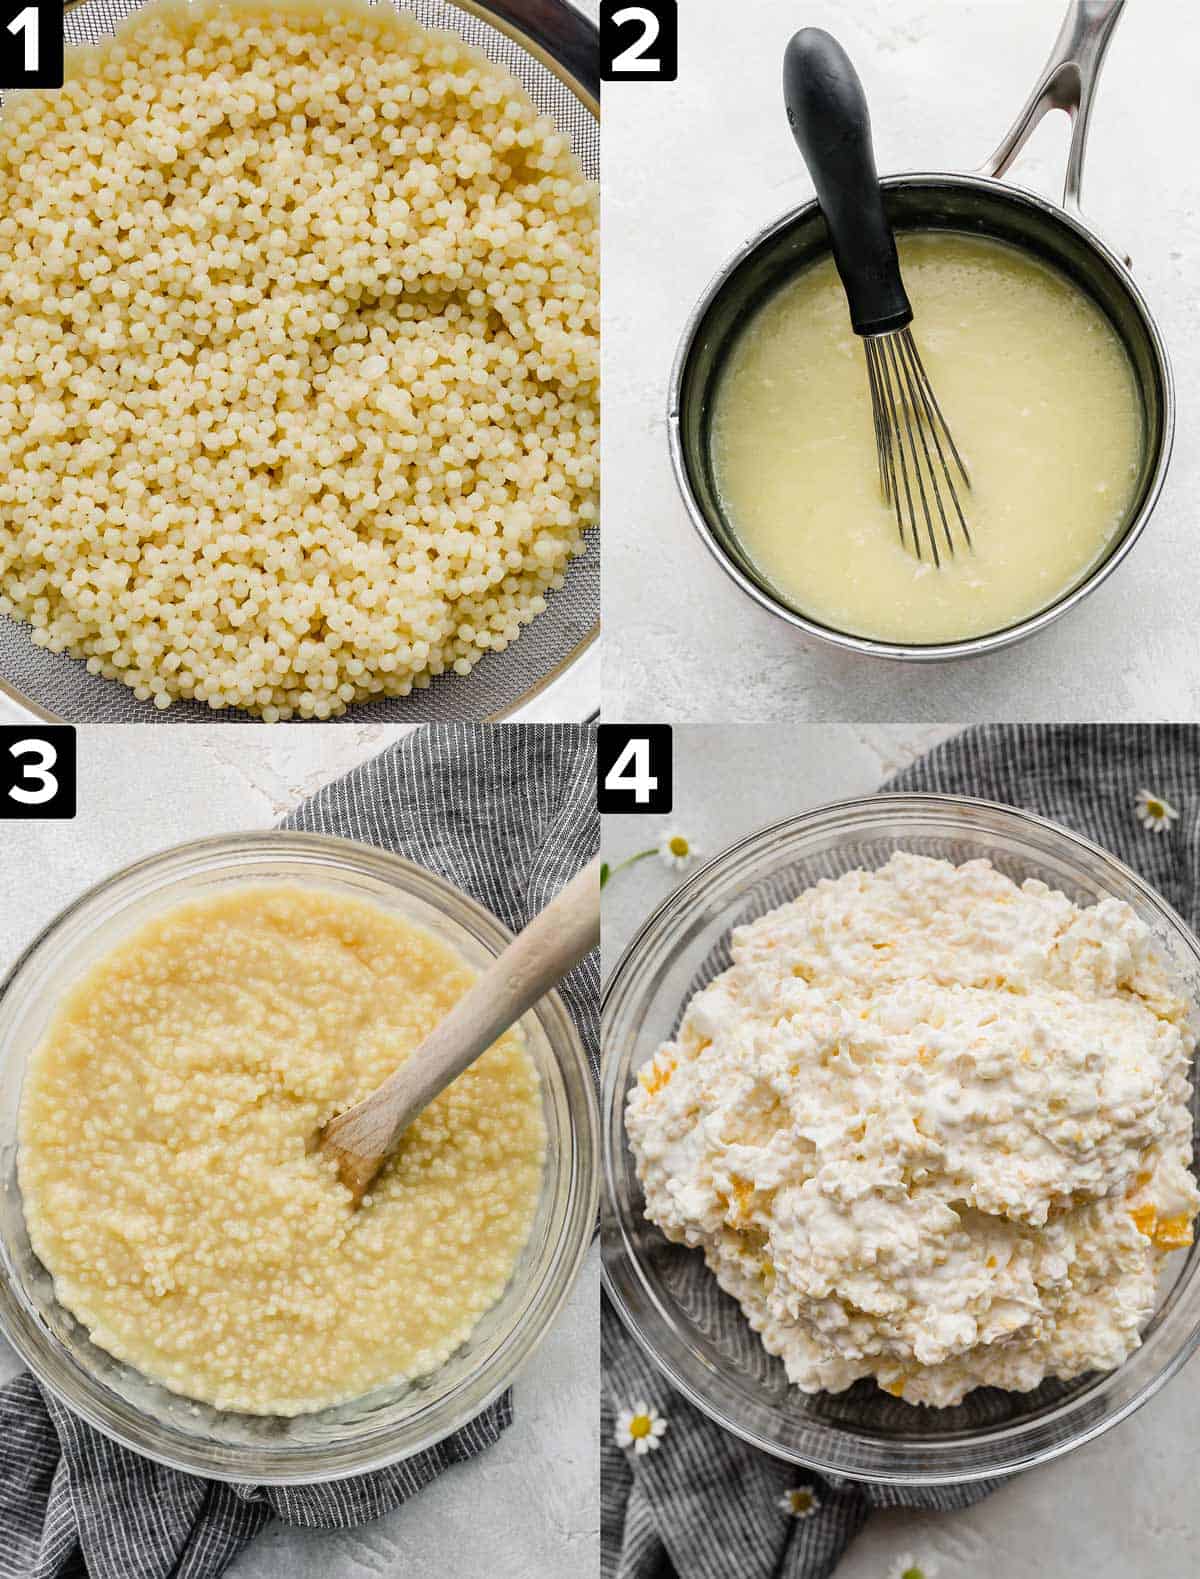 Four images showing how to make Acini di Pepe Salad, or frog eye salad, using a homemade pineapple fruit juice and cool whip.